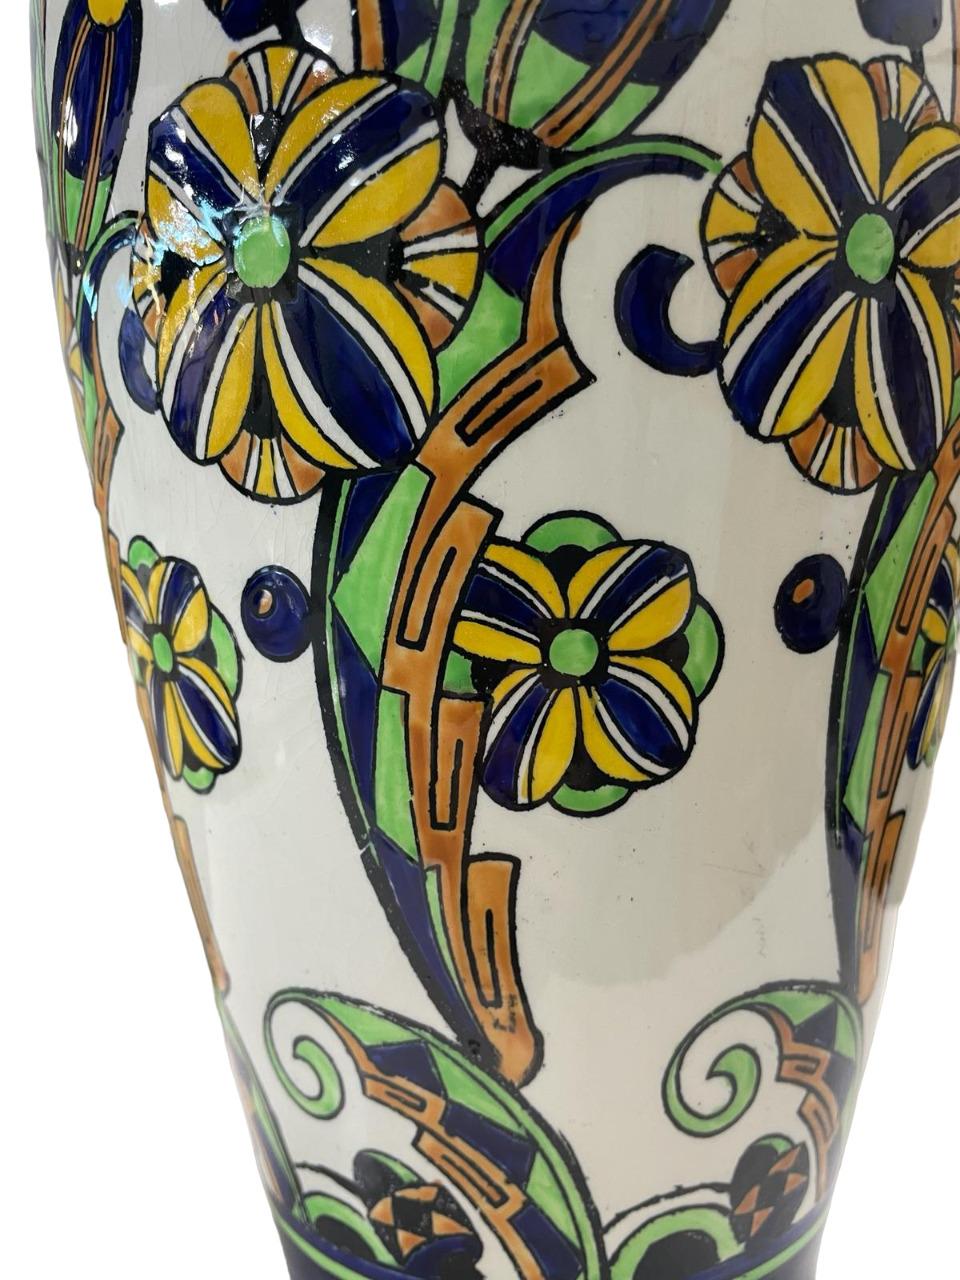 ART DECO LARGE Charles Catteau for Boch Keramis Vase circa 1927 In Good Condition For Sale In Richmond Hill, ON